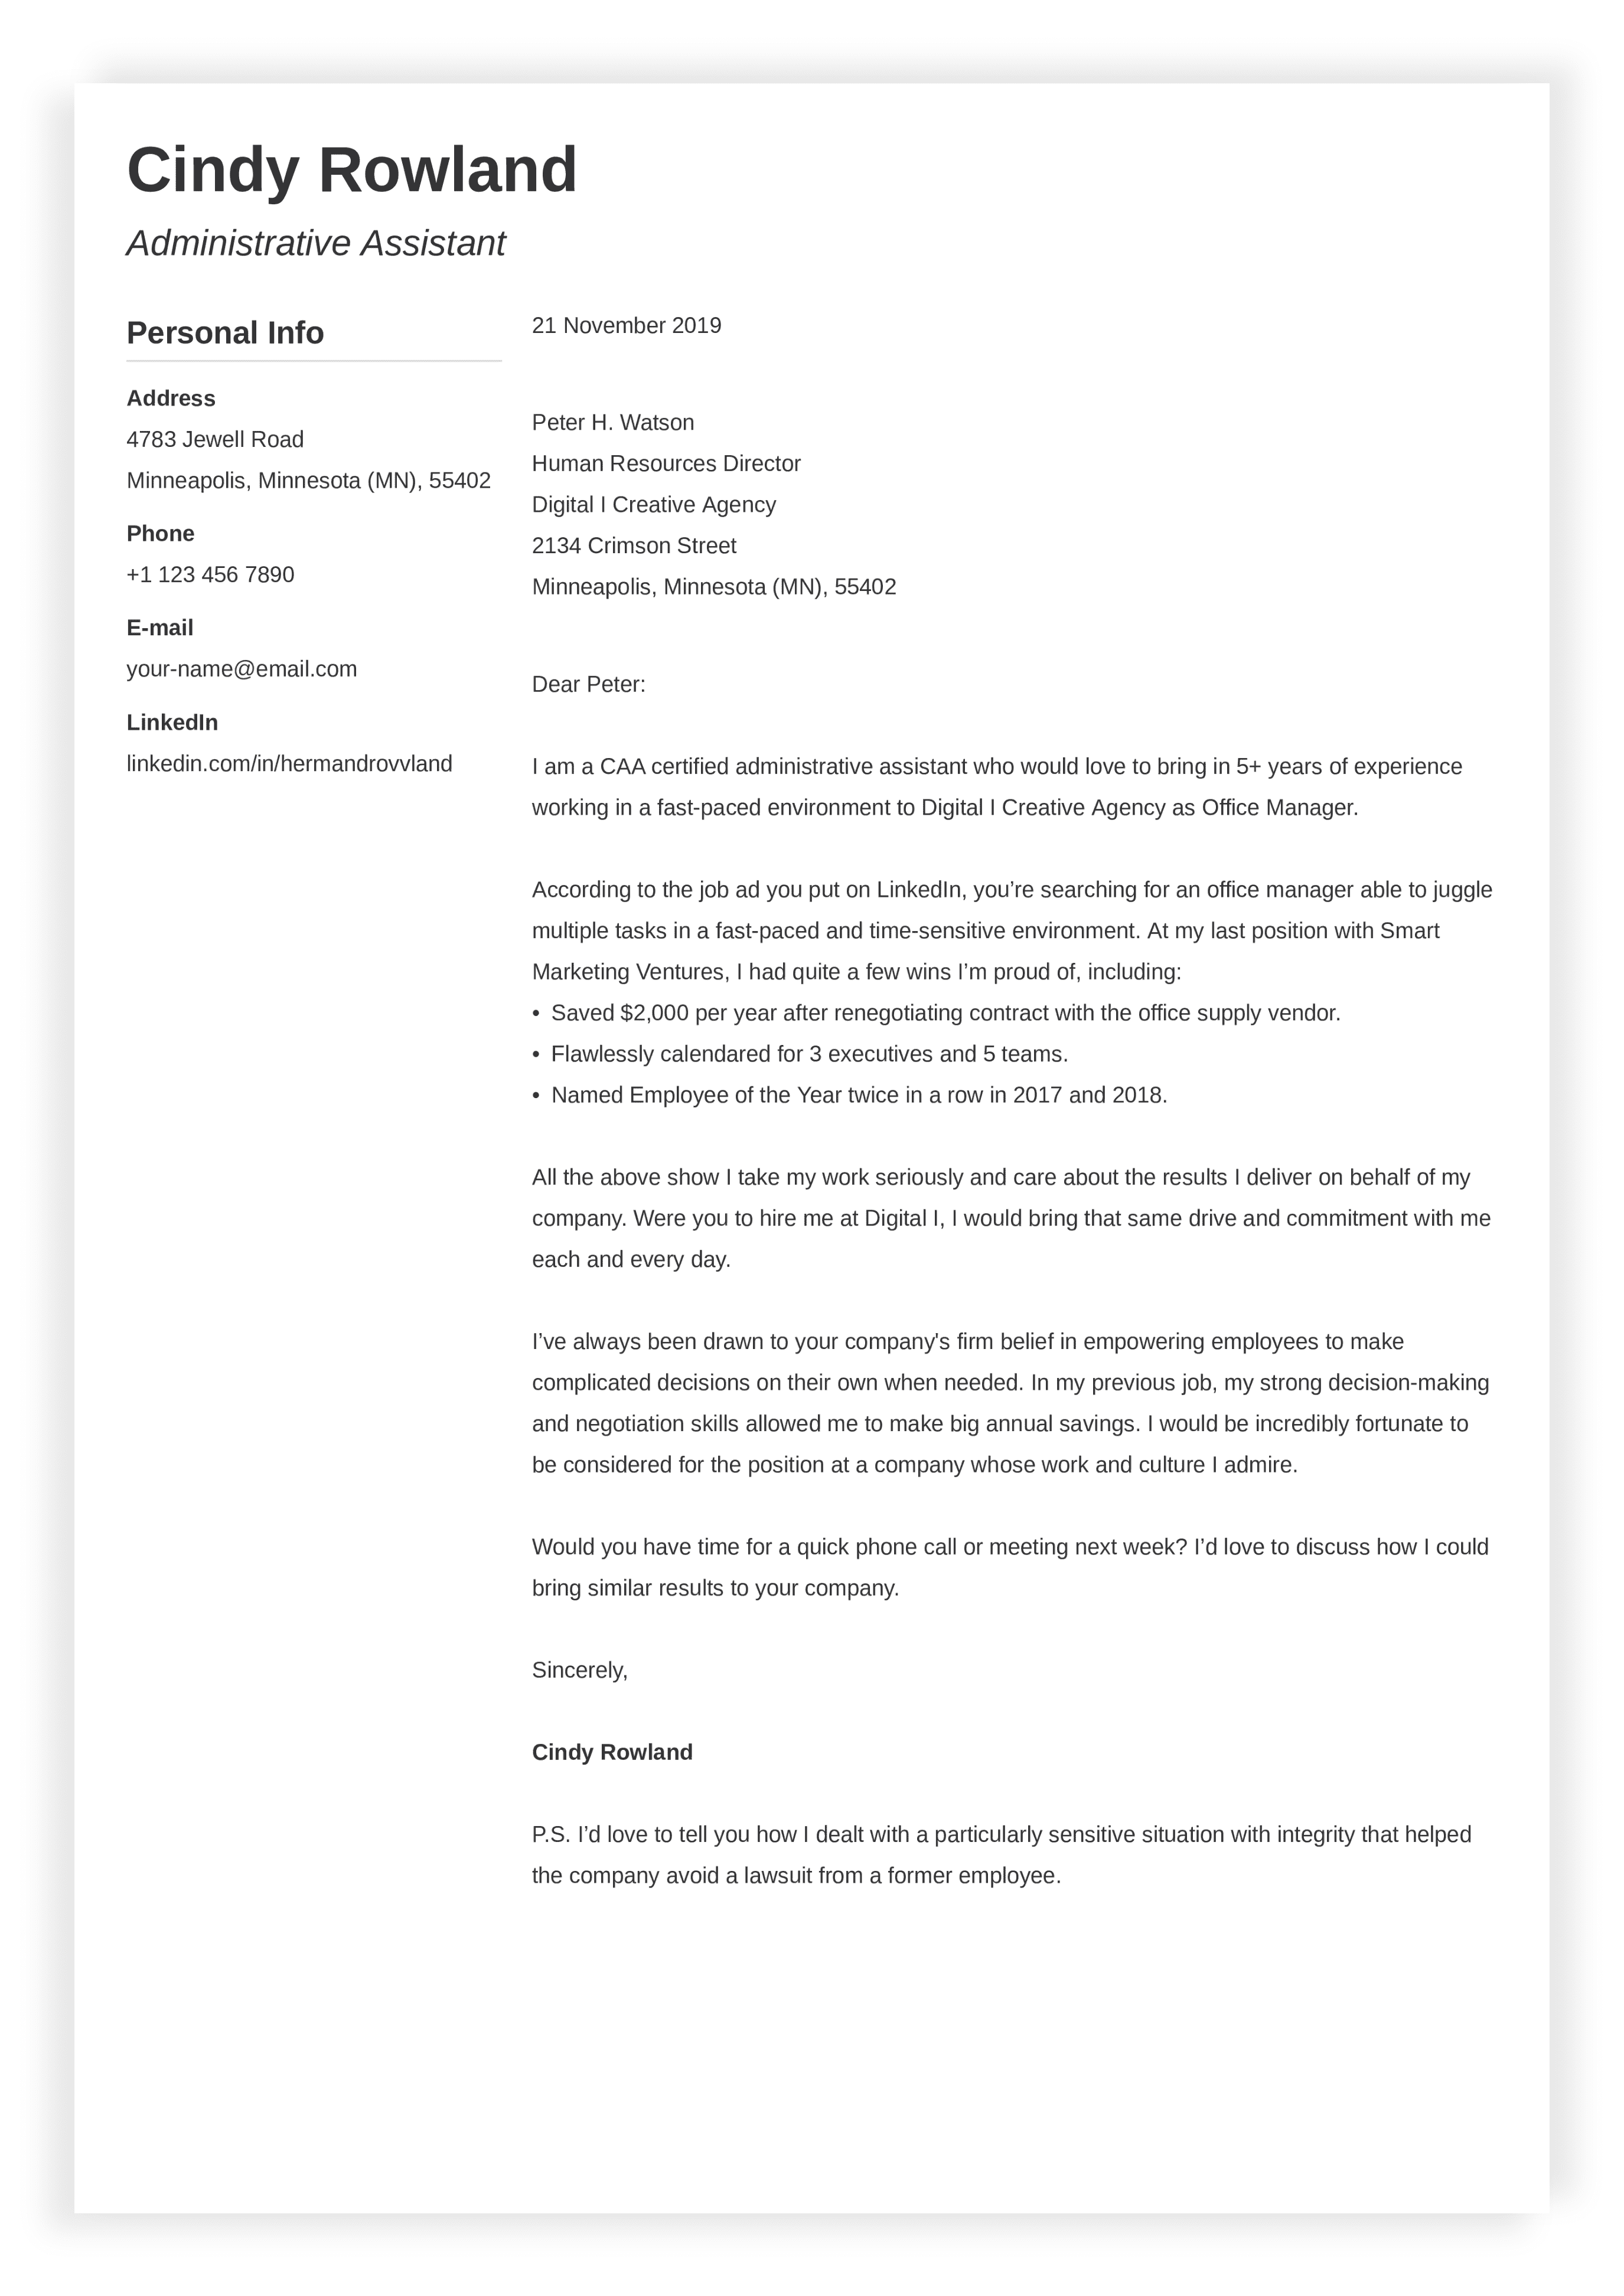 How To Write An Application Letter Your Boss